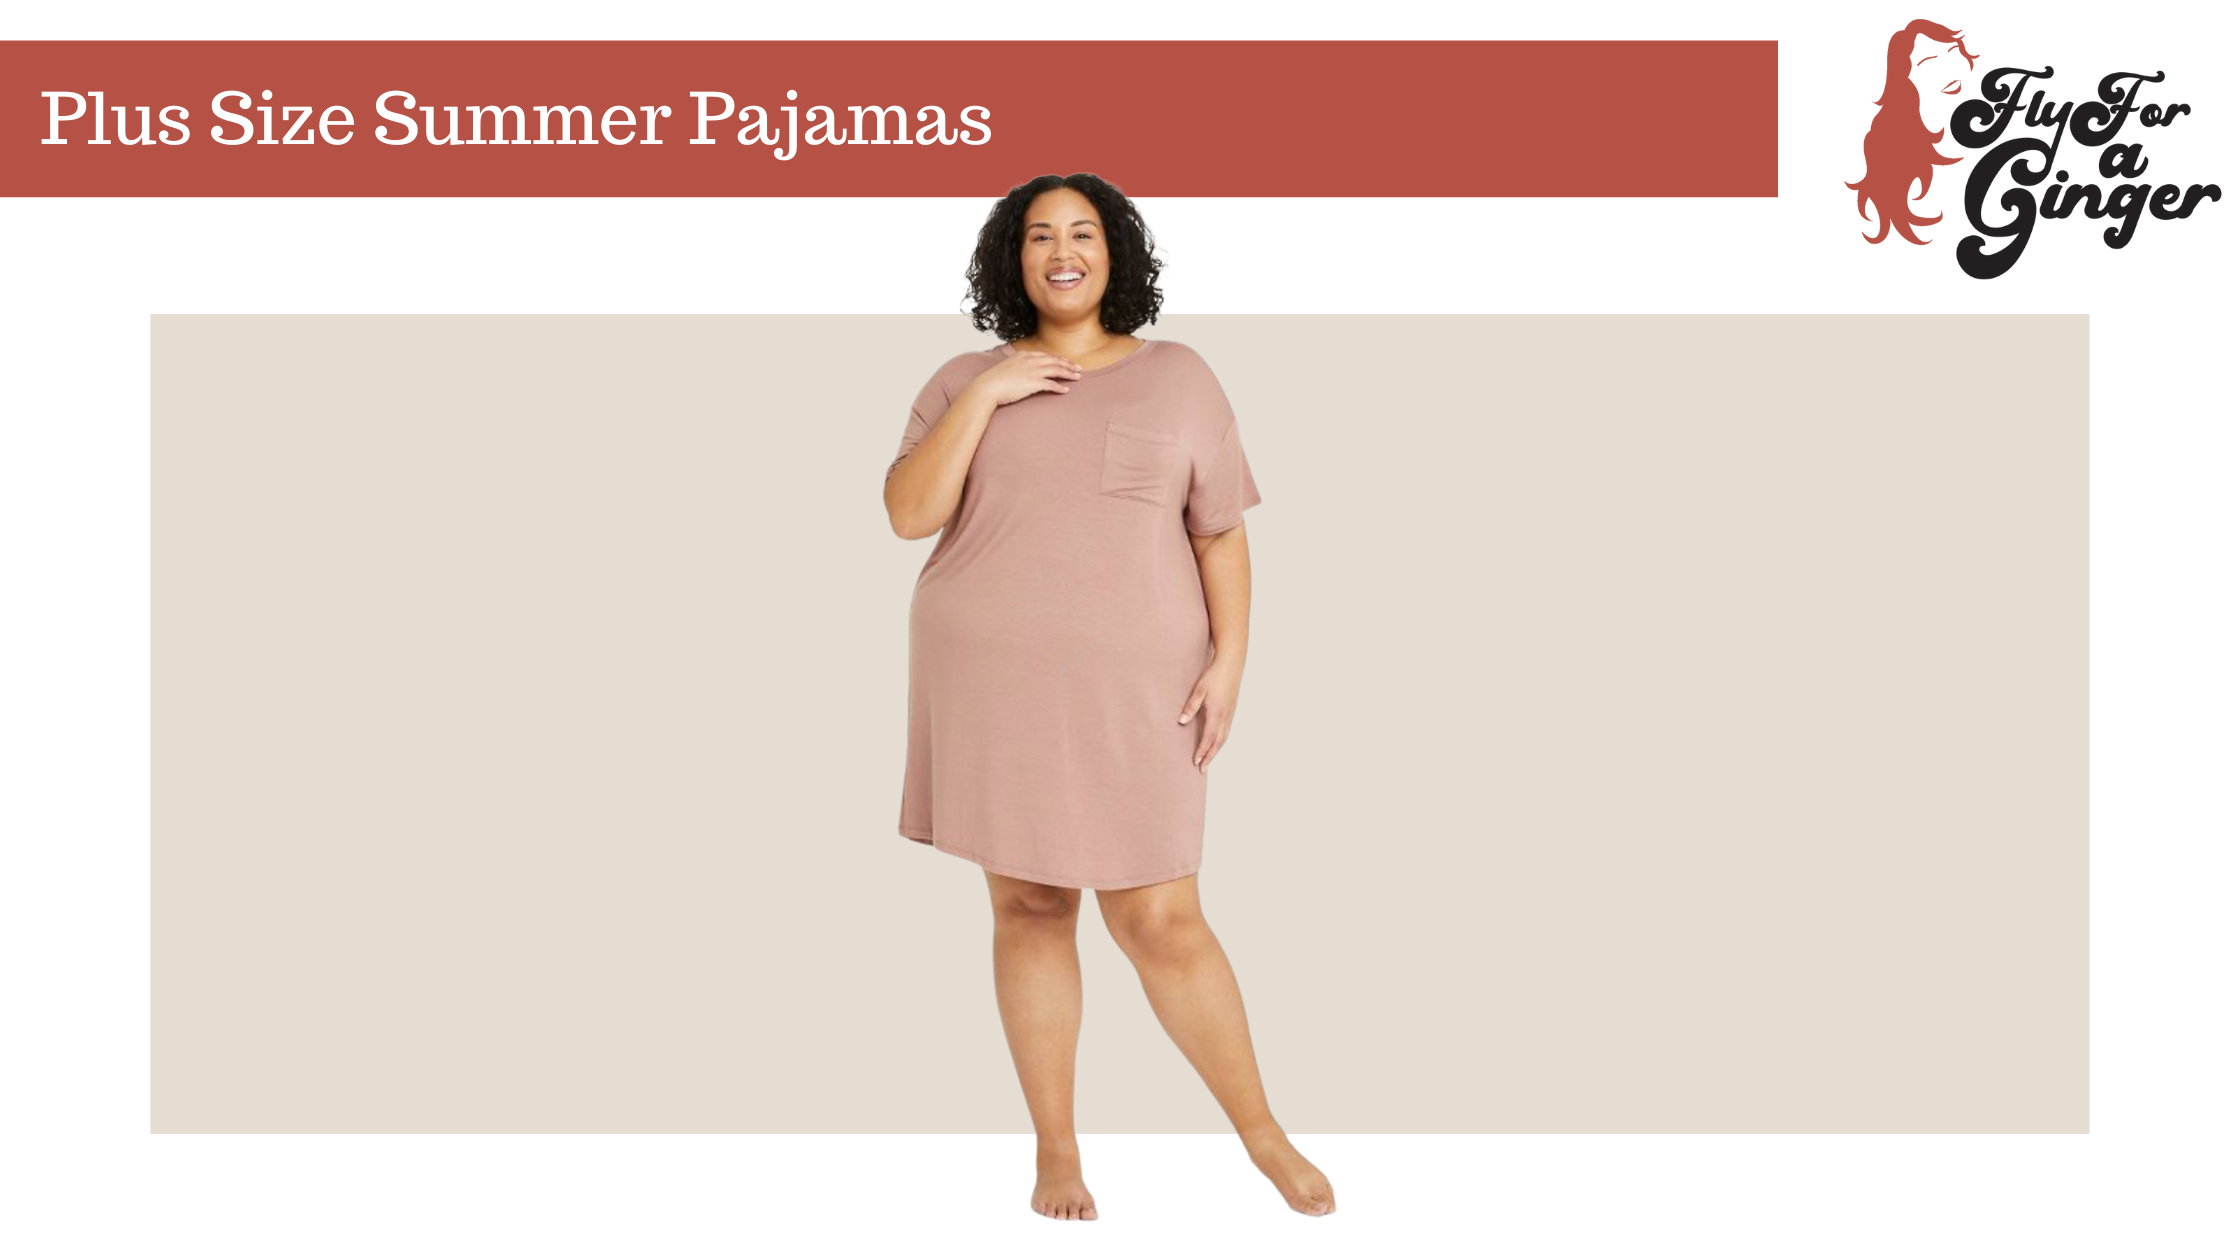 Plus Size Pajamas for Summer